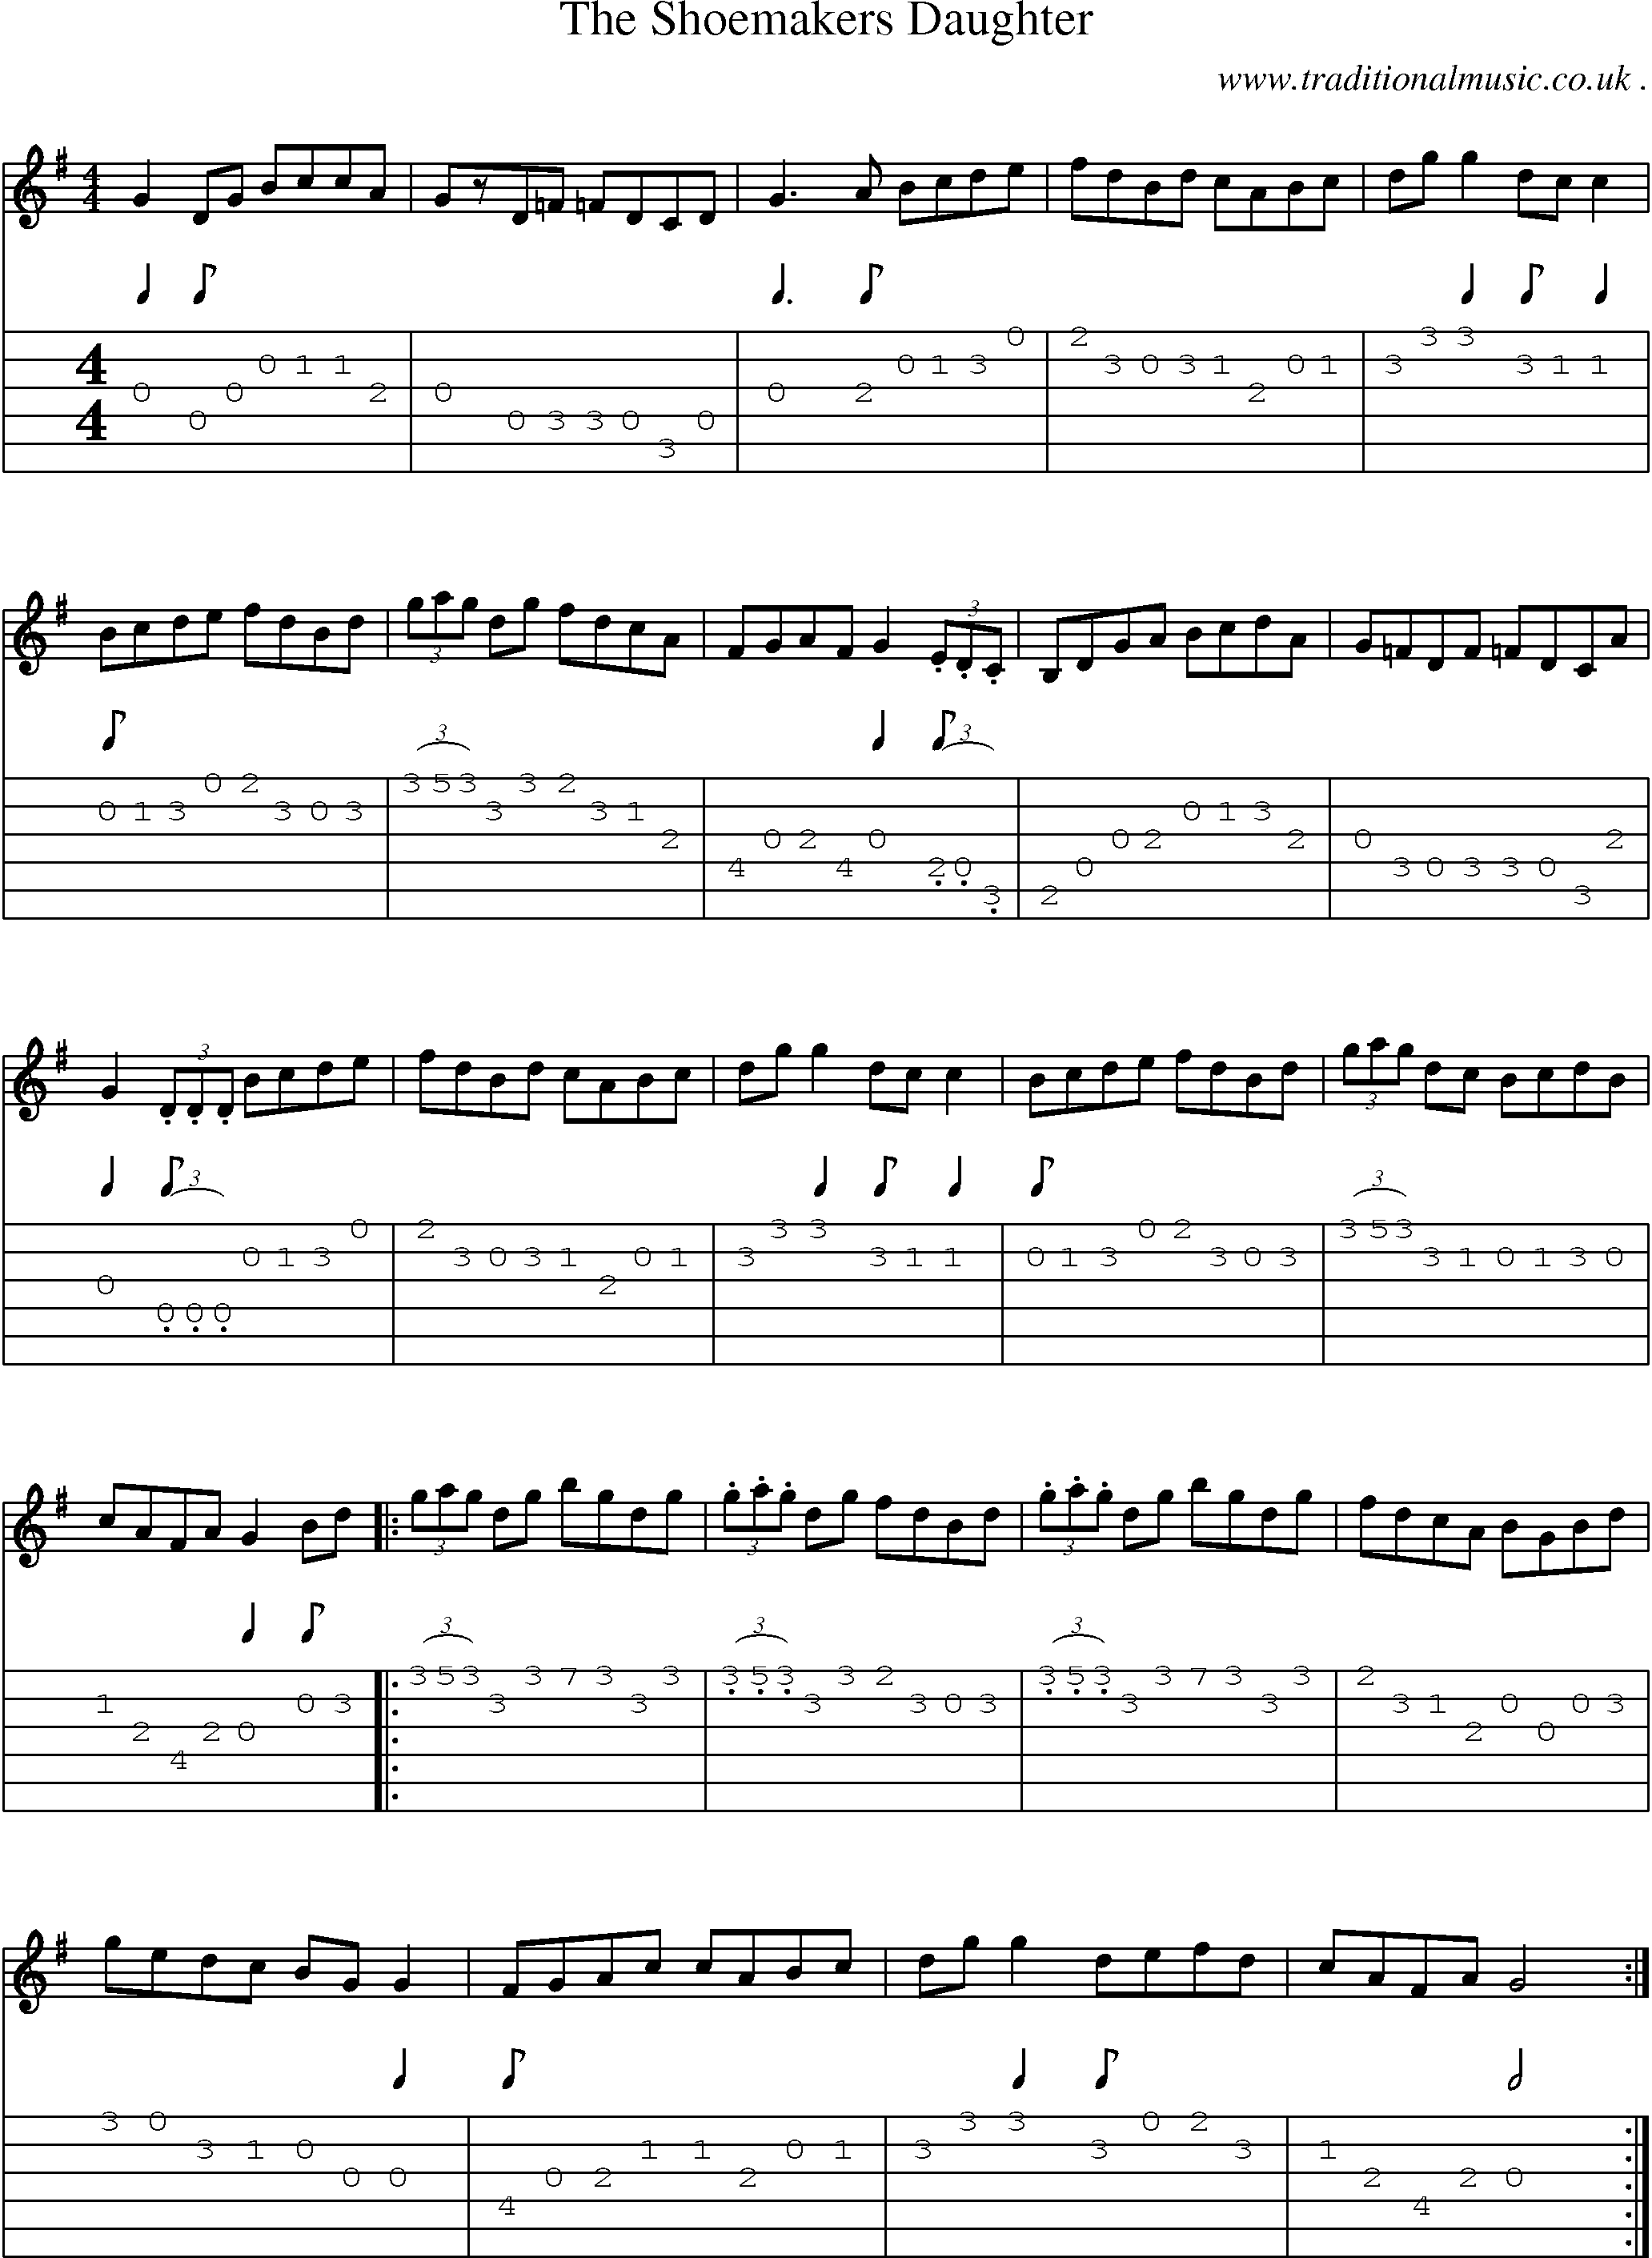 Sheet-Music and Guitar Tabs for The Shoemakers Daughter